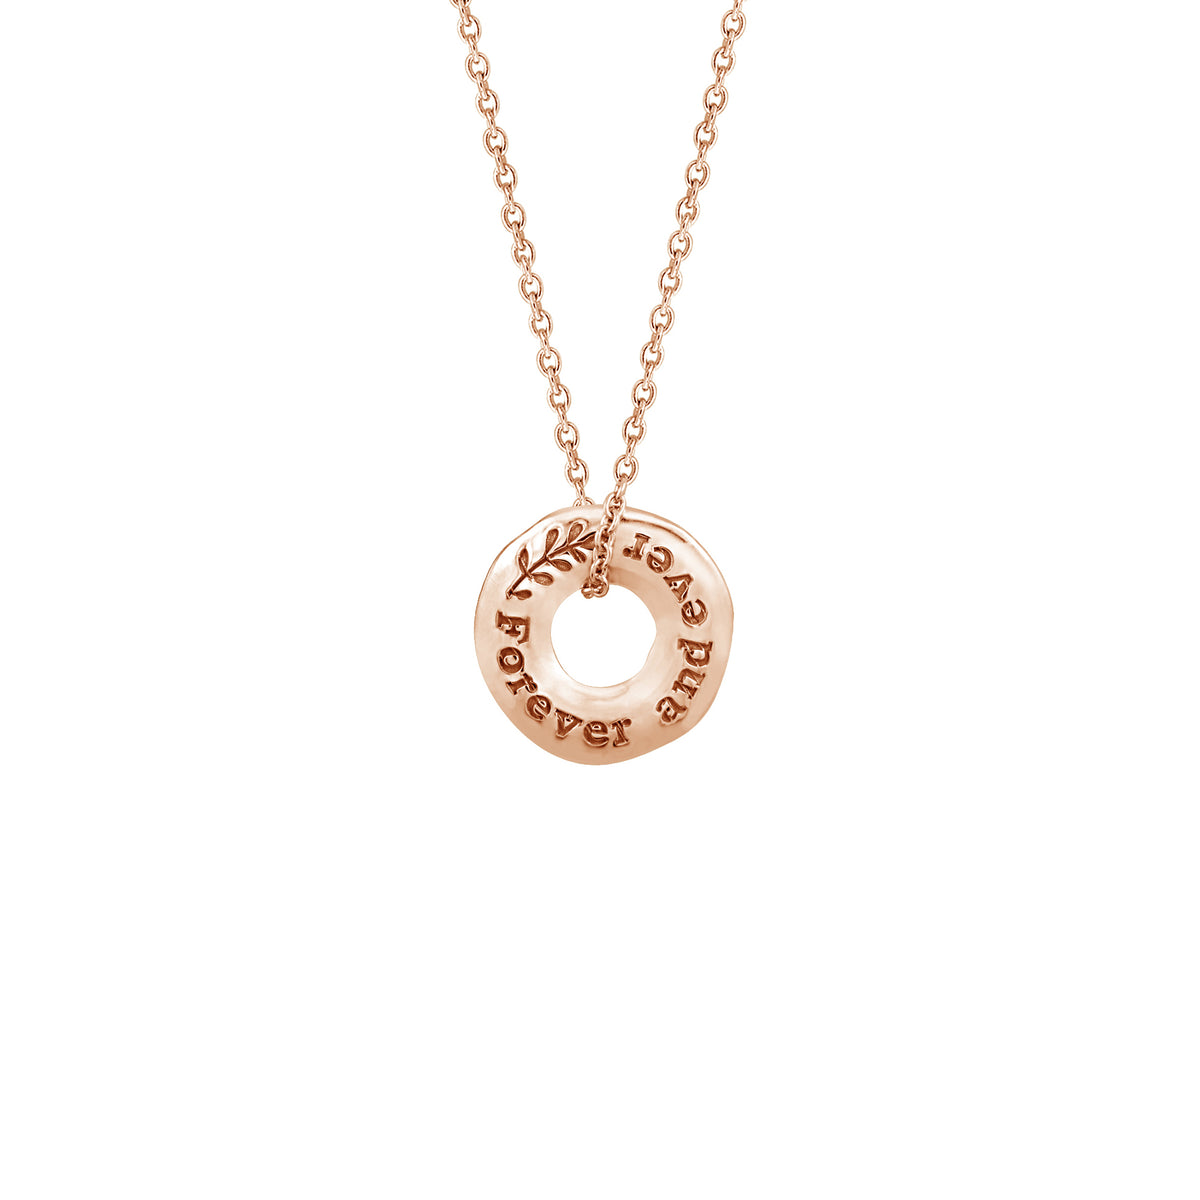 Personalized Name in Circle Pendant Necklace